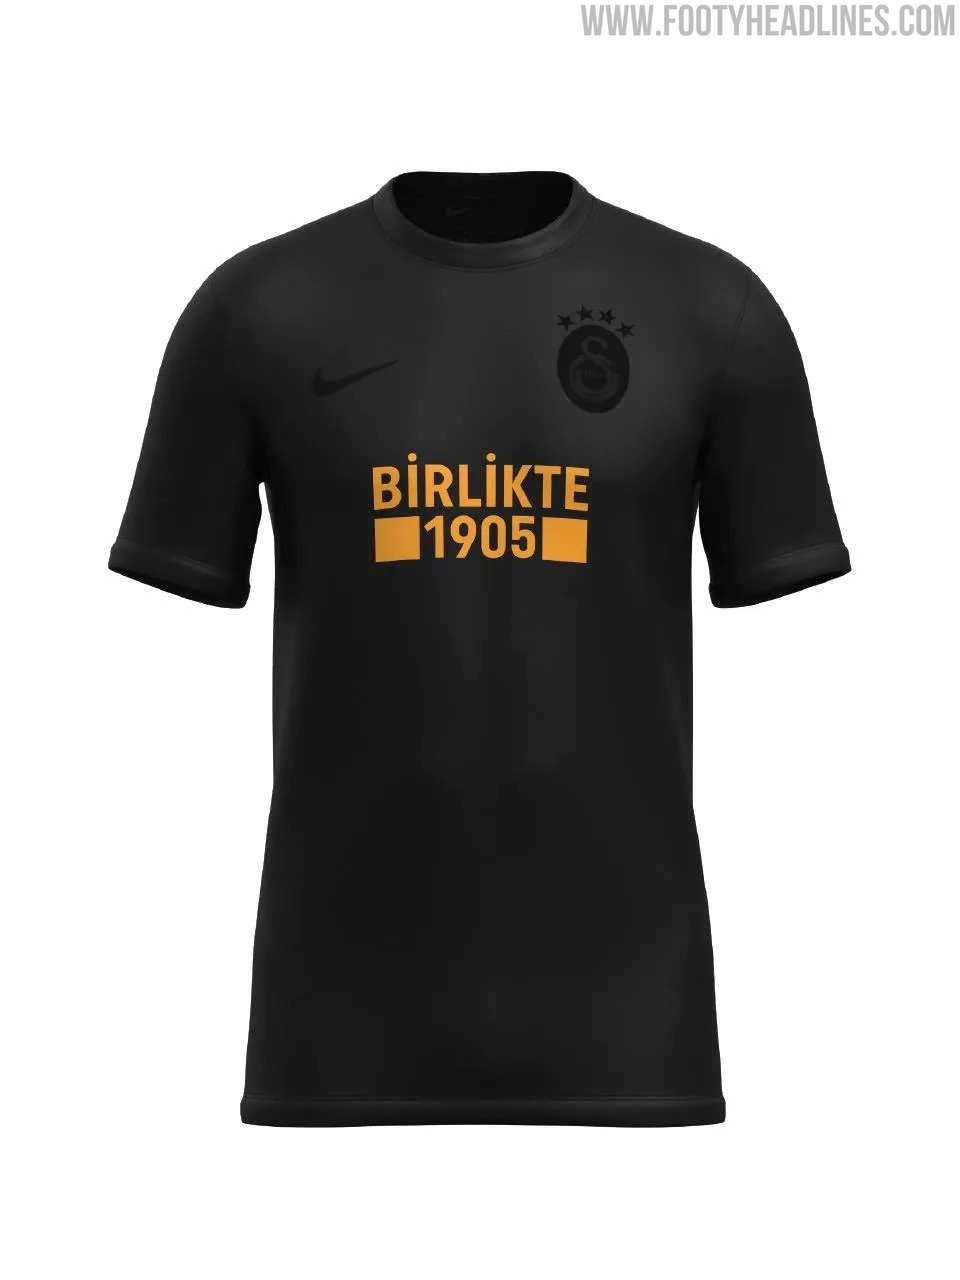 Galatasaray 2022-23 Special Blackout Kit Released - to Support Victims of  Turkey Earthquake - Footy Headlines